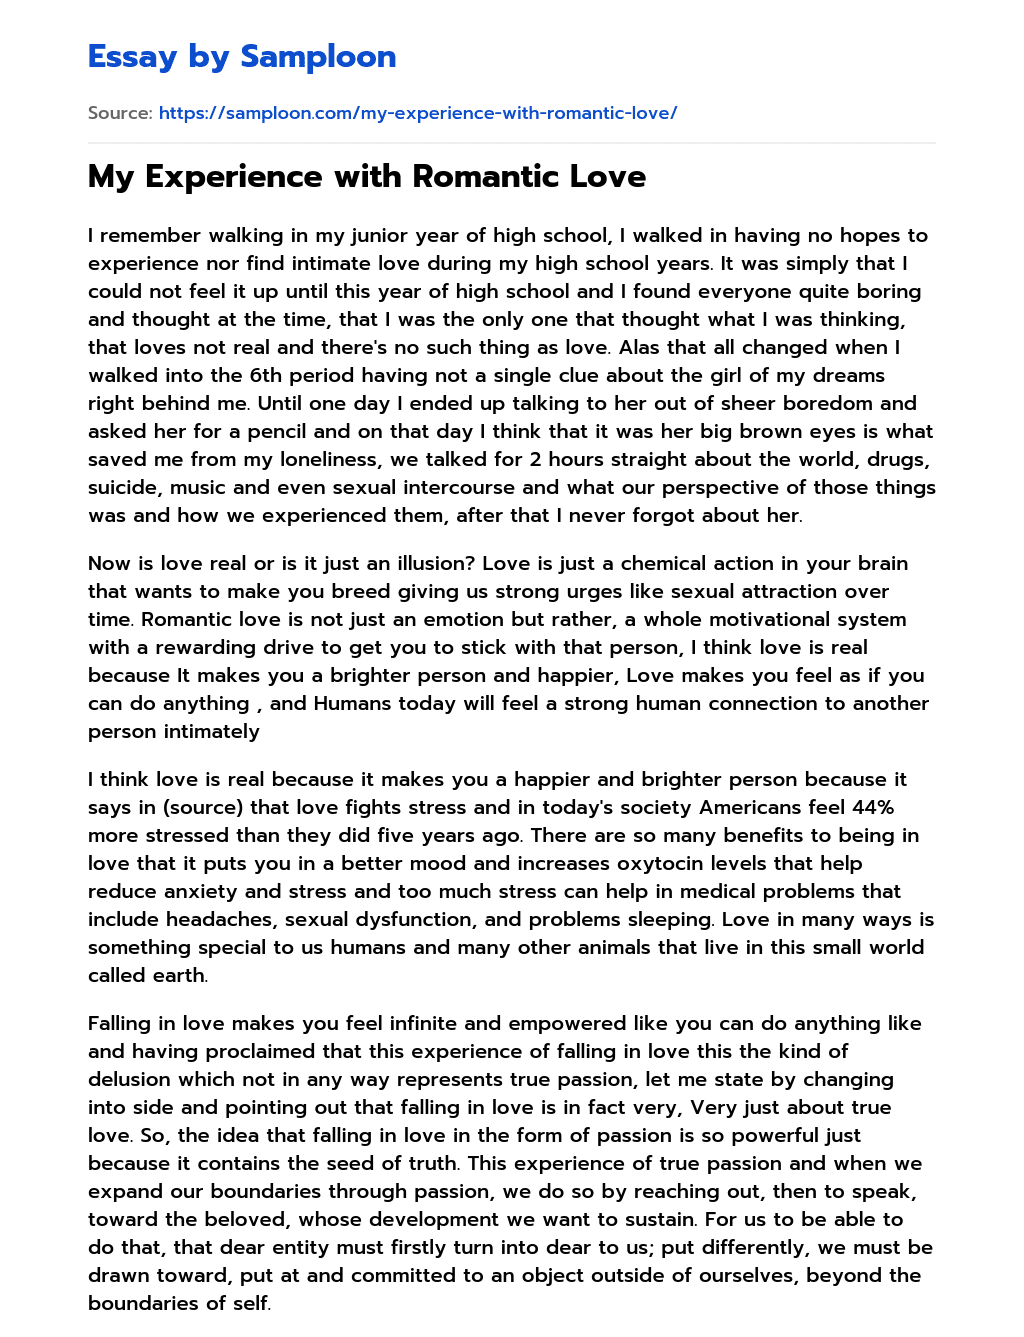 My Experience with Romantic Love essay